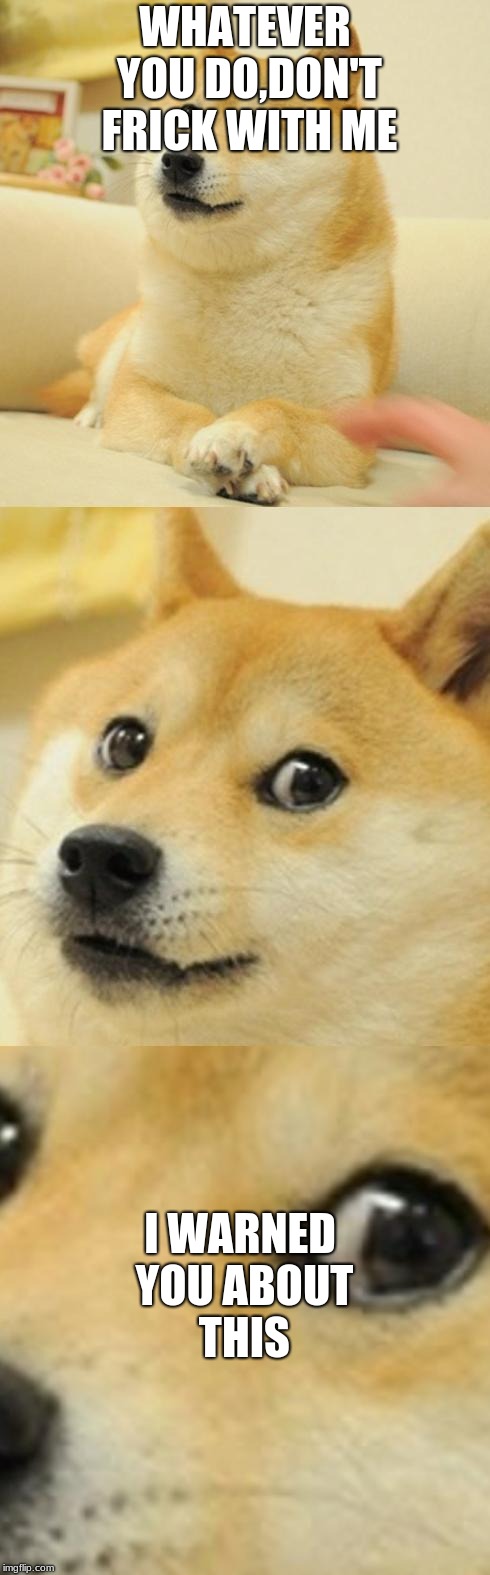 Doge Game |  WHATEVER YOU DO,DON'T FRICK WITH ME; I WARNED YOU ABOUT THIS | image tagged in doge game | made w/ Imgflip meme maker